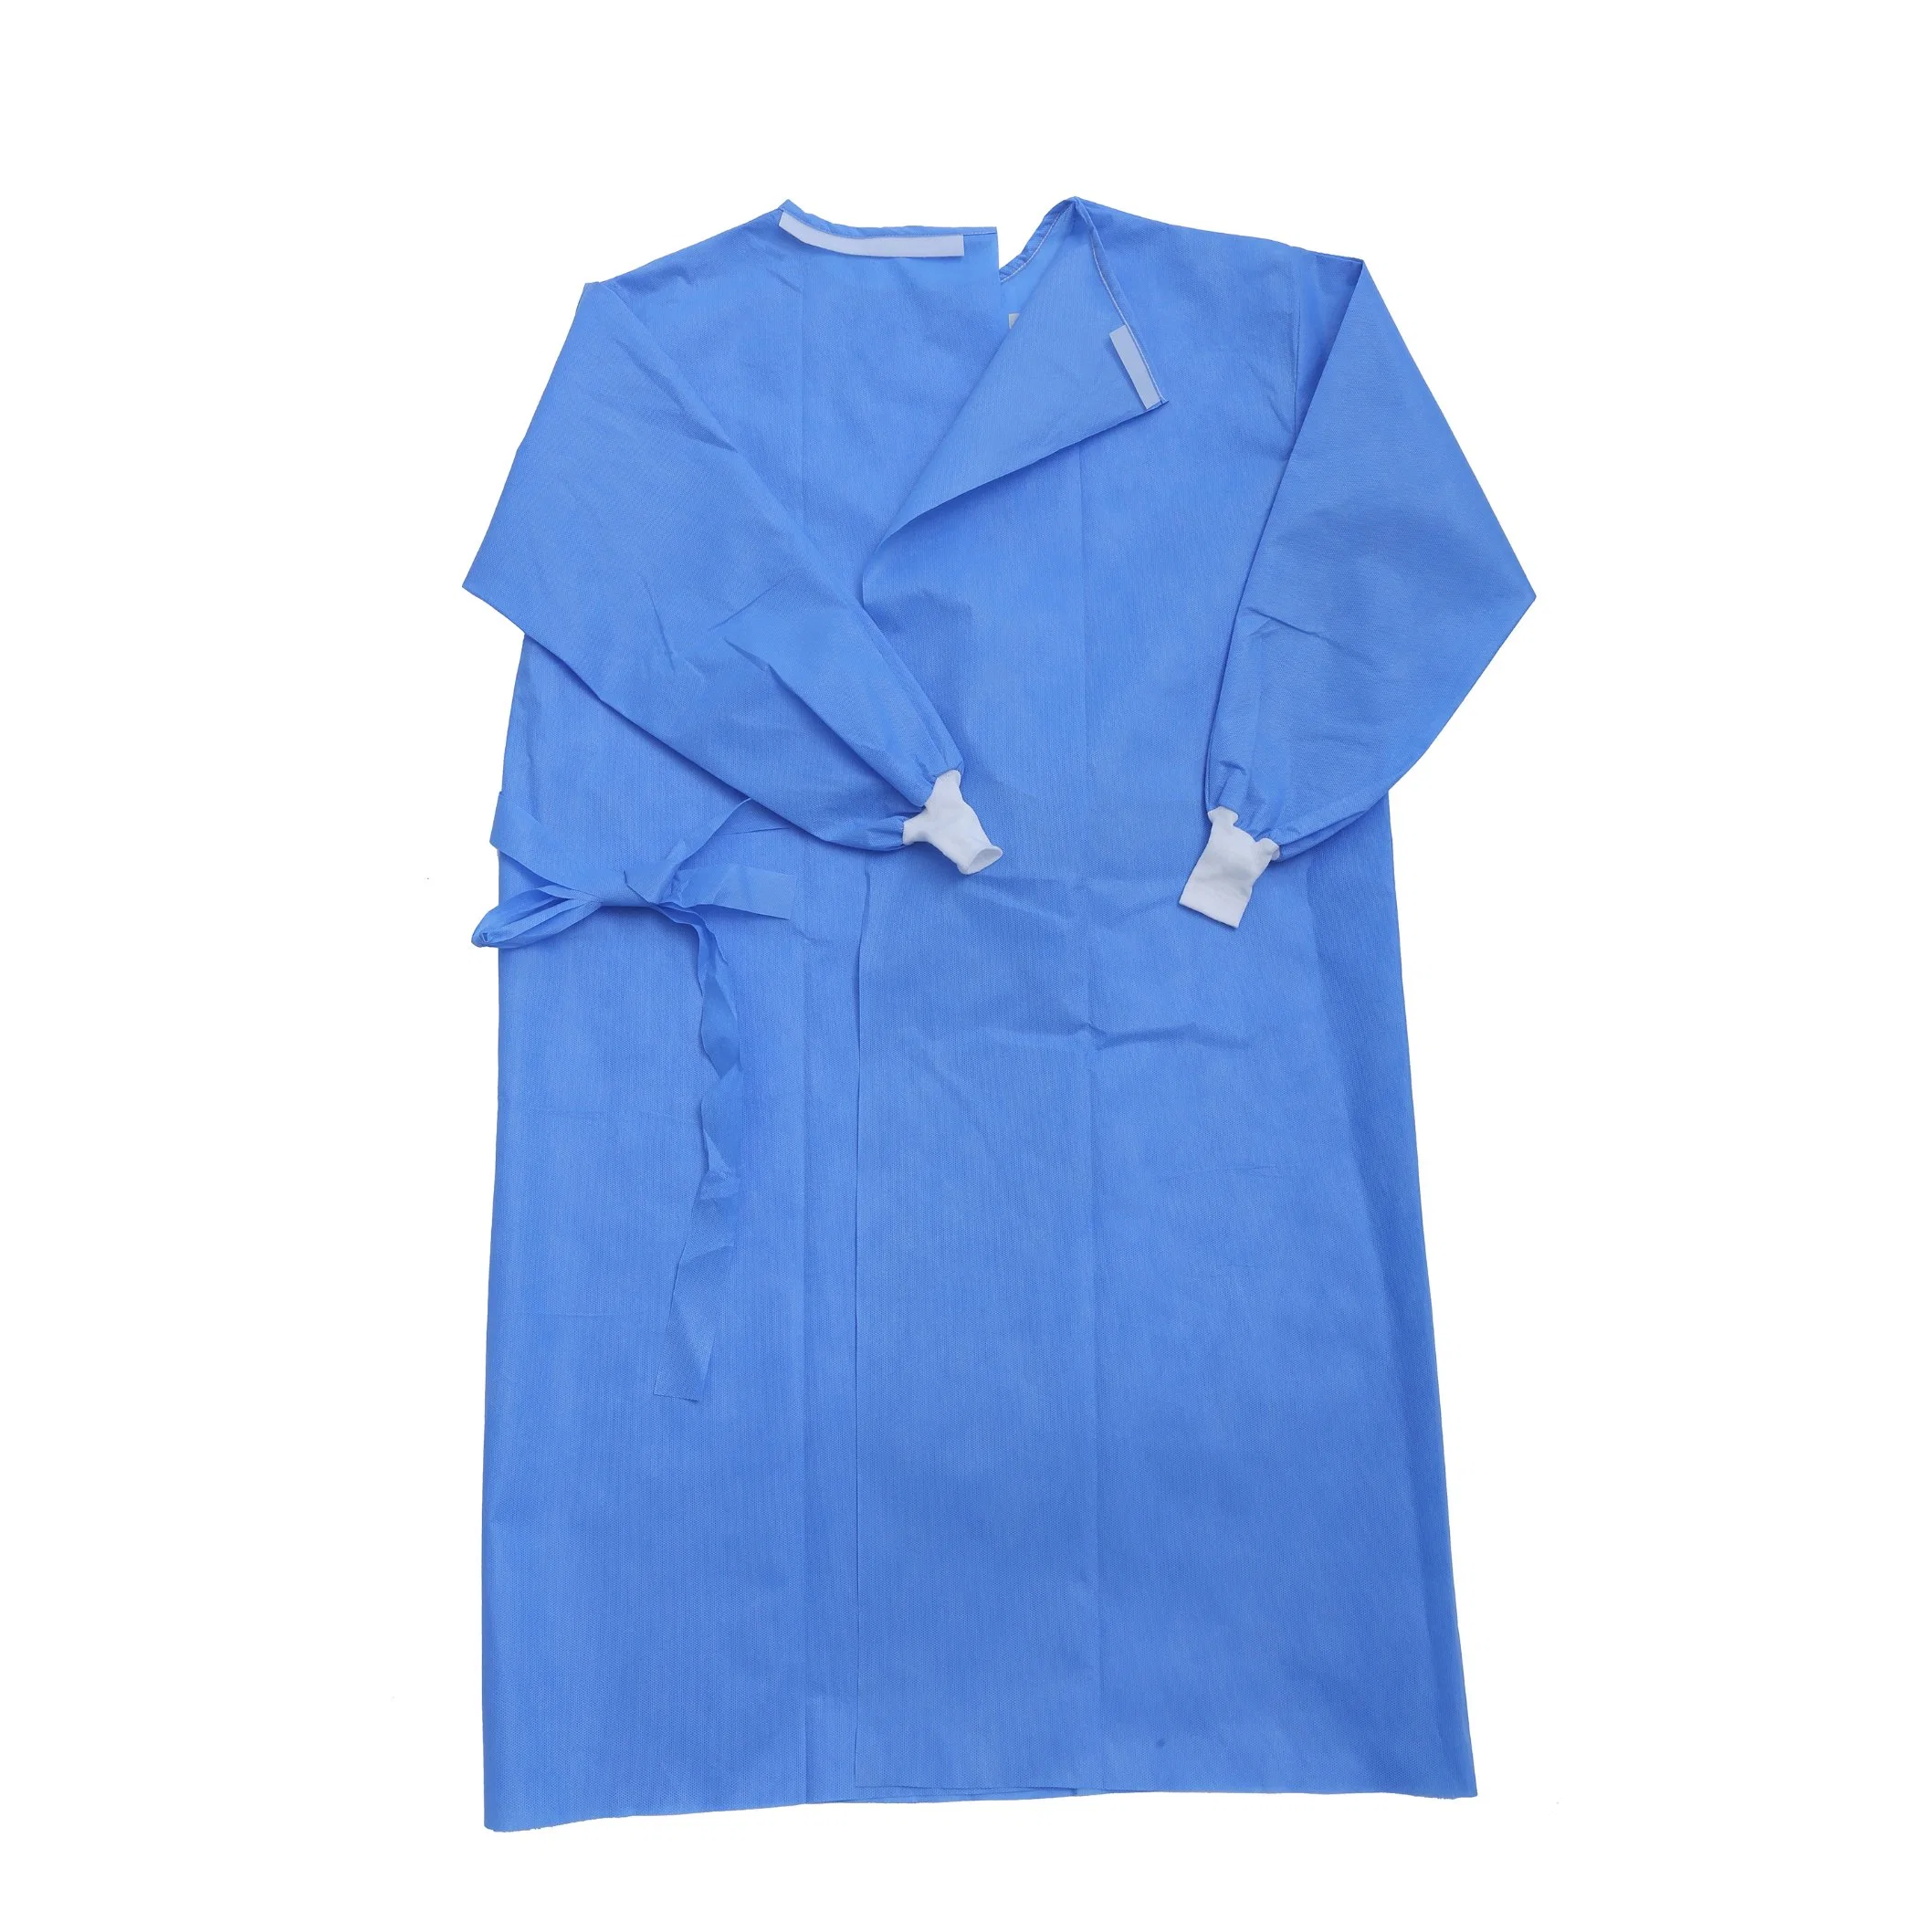 SMS Disposable Medical Level 3 Level 2 Non Woven Sterilization Surgical Gown